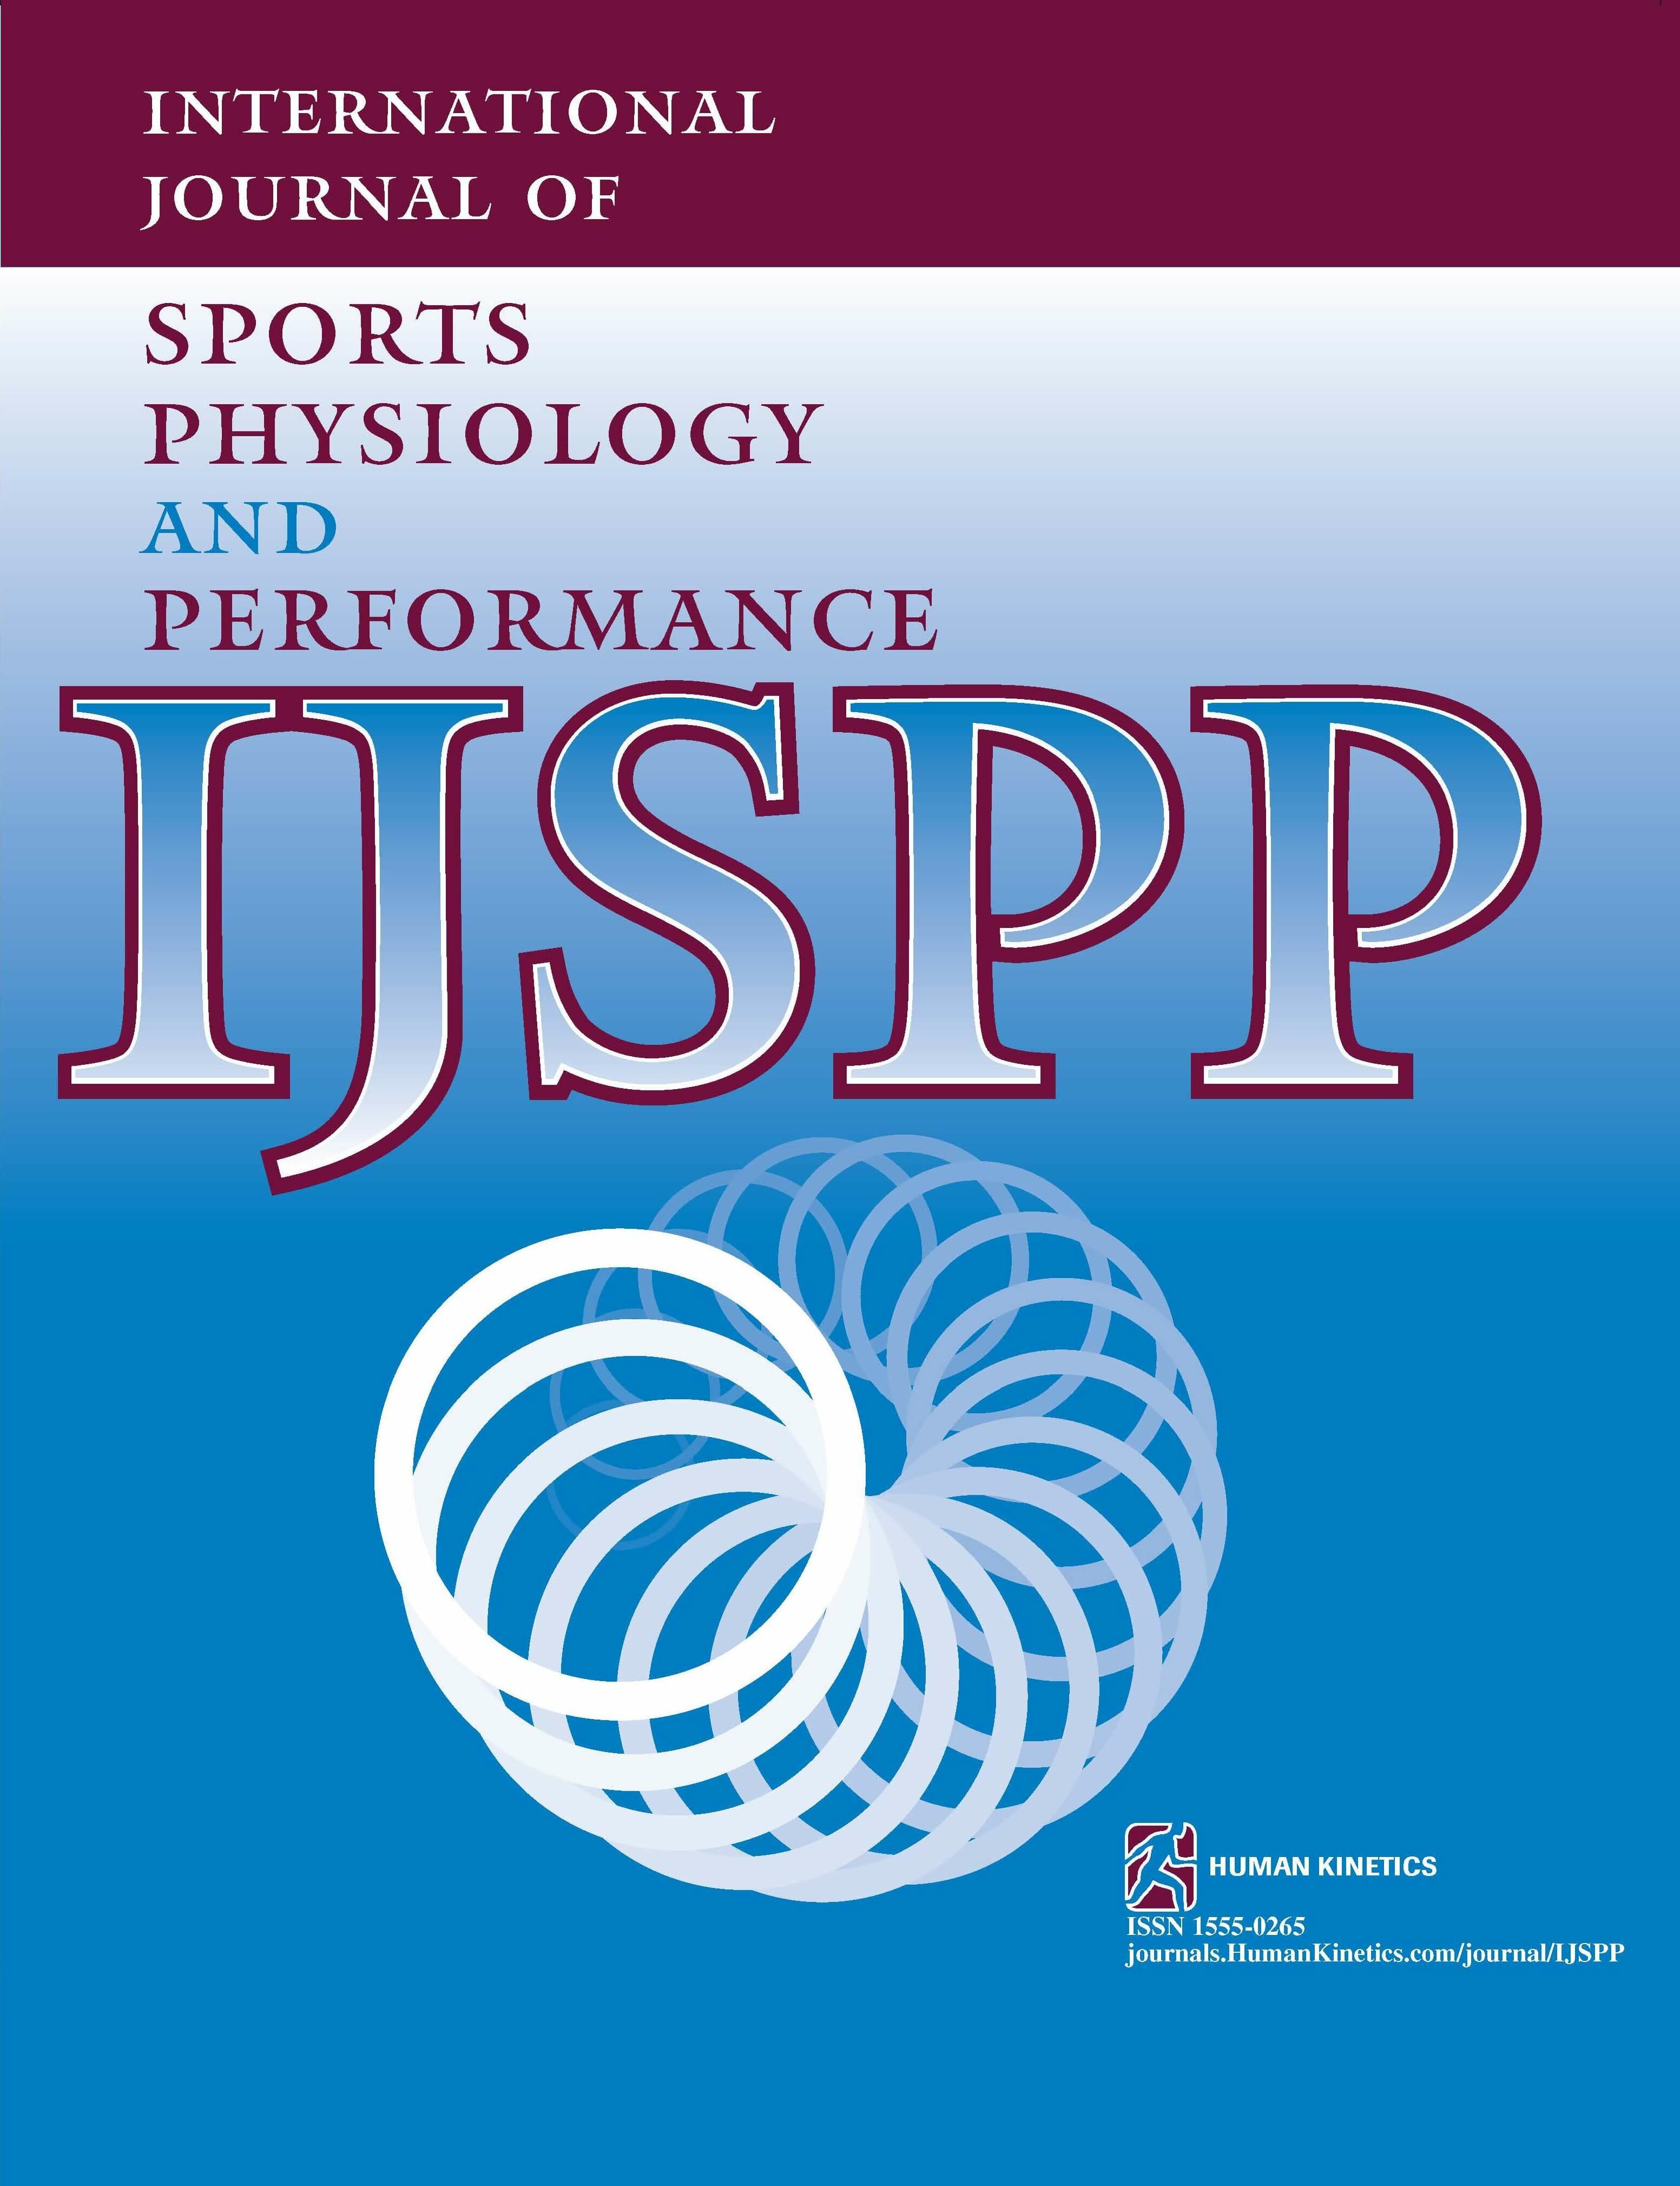 Erratum. Inconsistent Effect of Psychometric-Scale Familiarization on the Relationship Between Ratings of Perceived Exertion and External Load Measures in Elite Youth Soccer Players